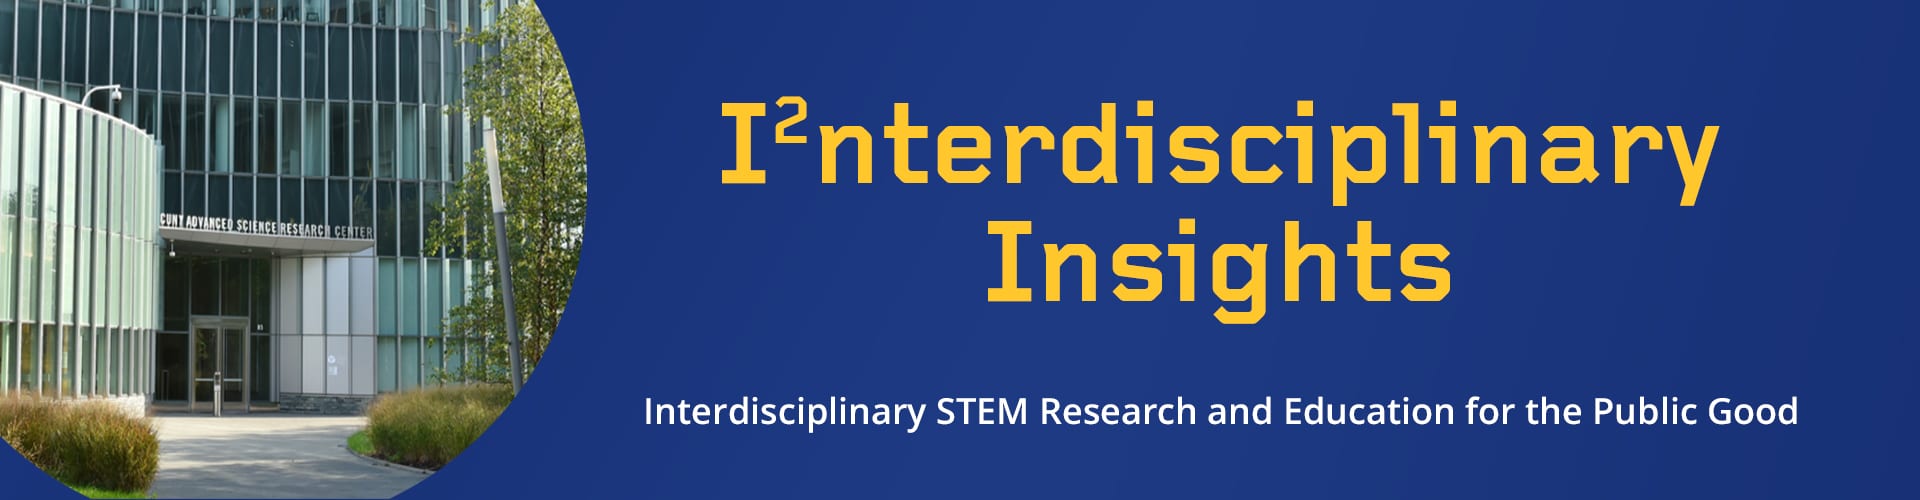 Interdisciplinary Insights: the newsletter of the ASRC